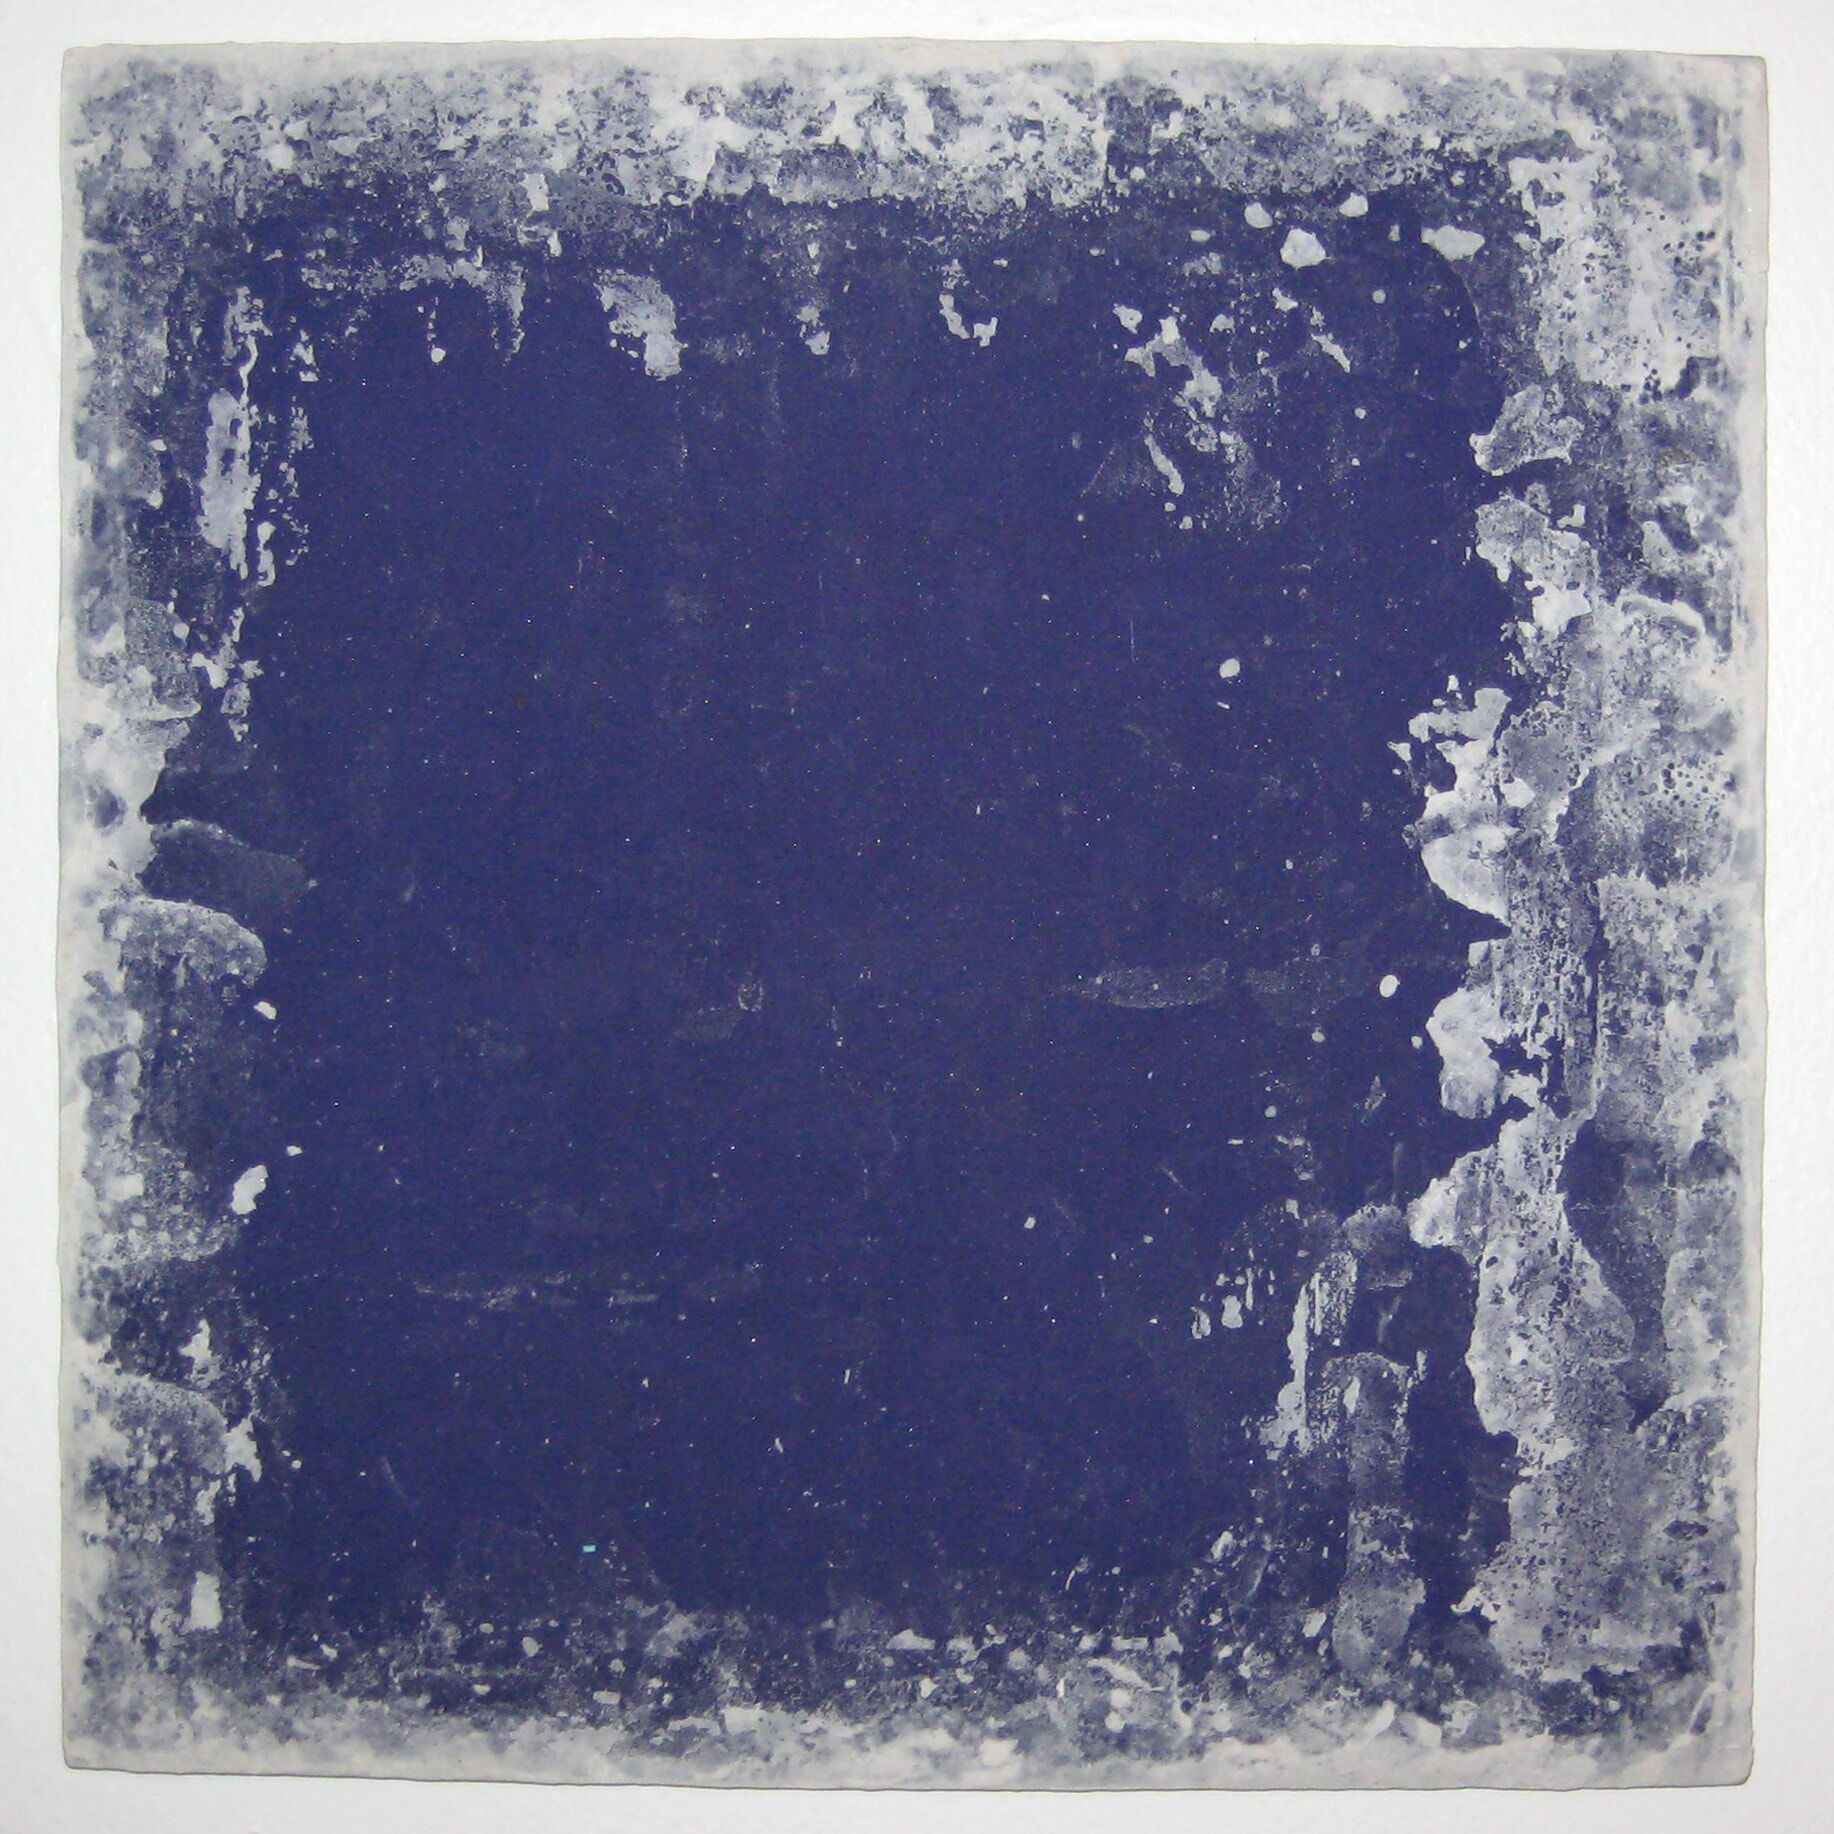 Untitled (s6), 2007 - 2008